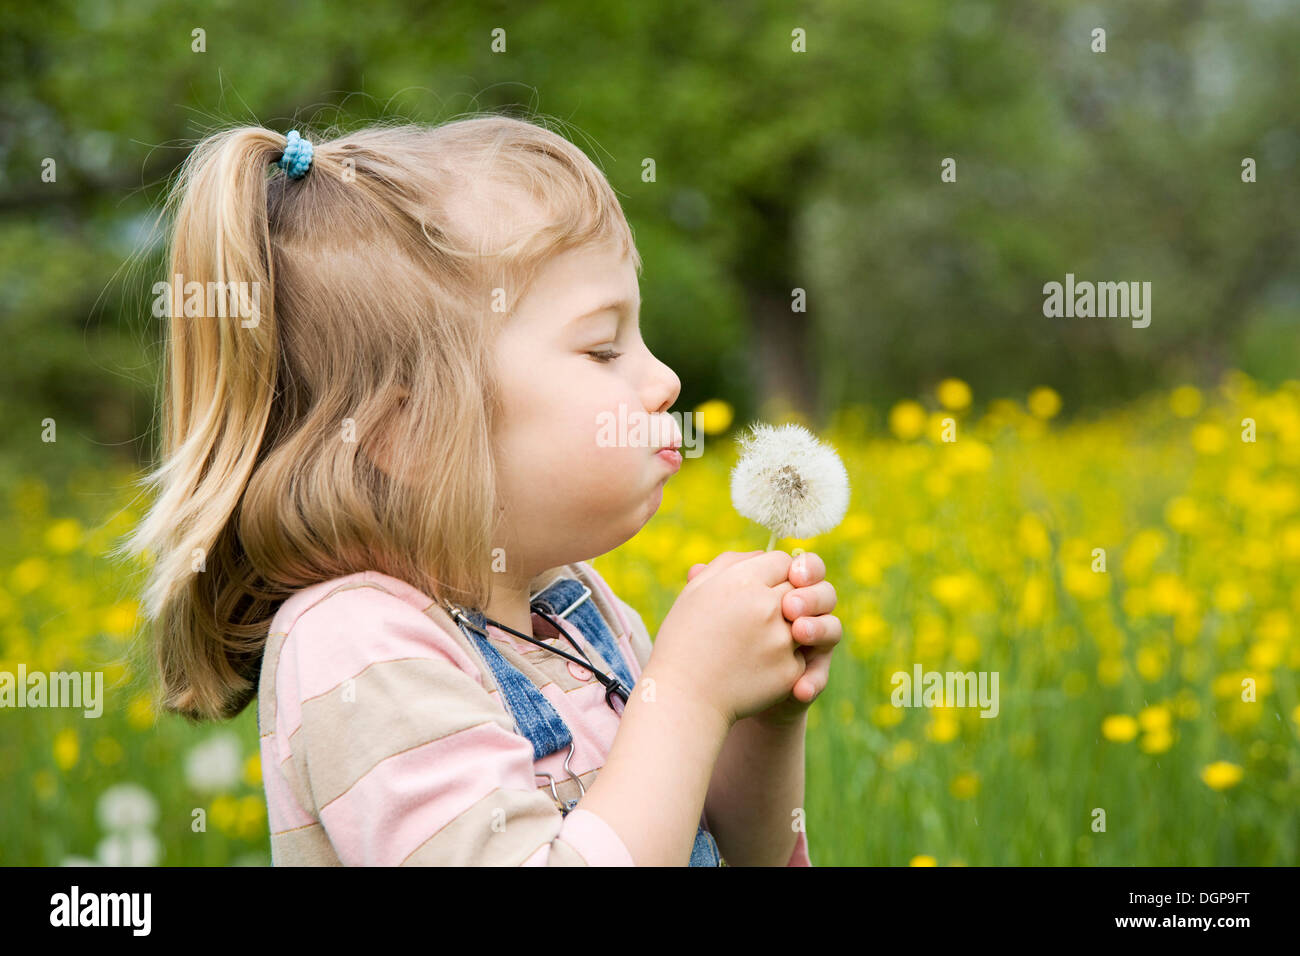 Girl sitting on a meadow holding a dandelion clock Stock Photo